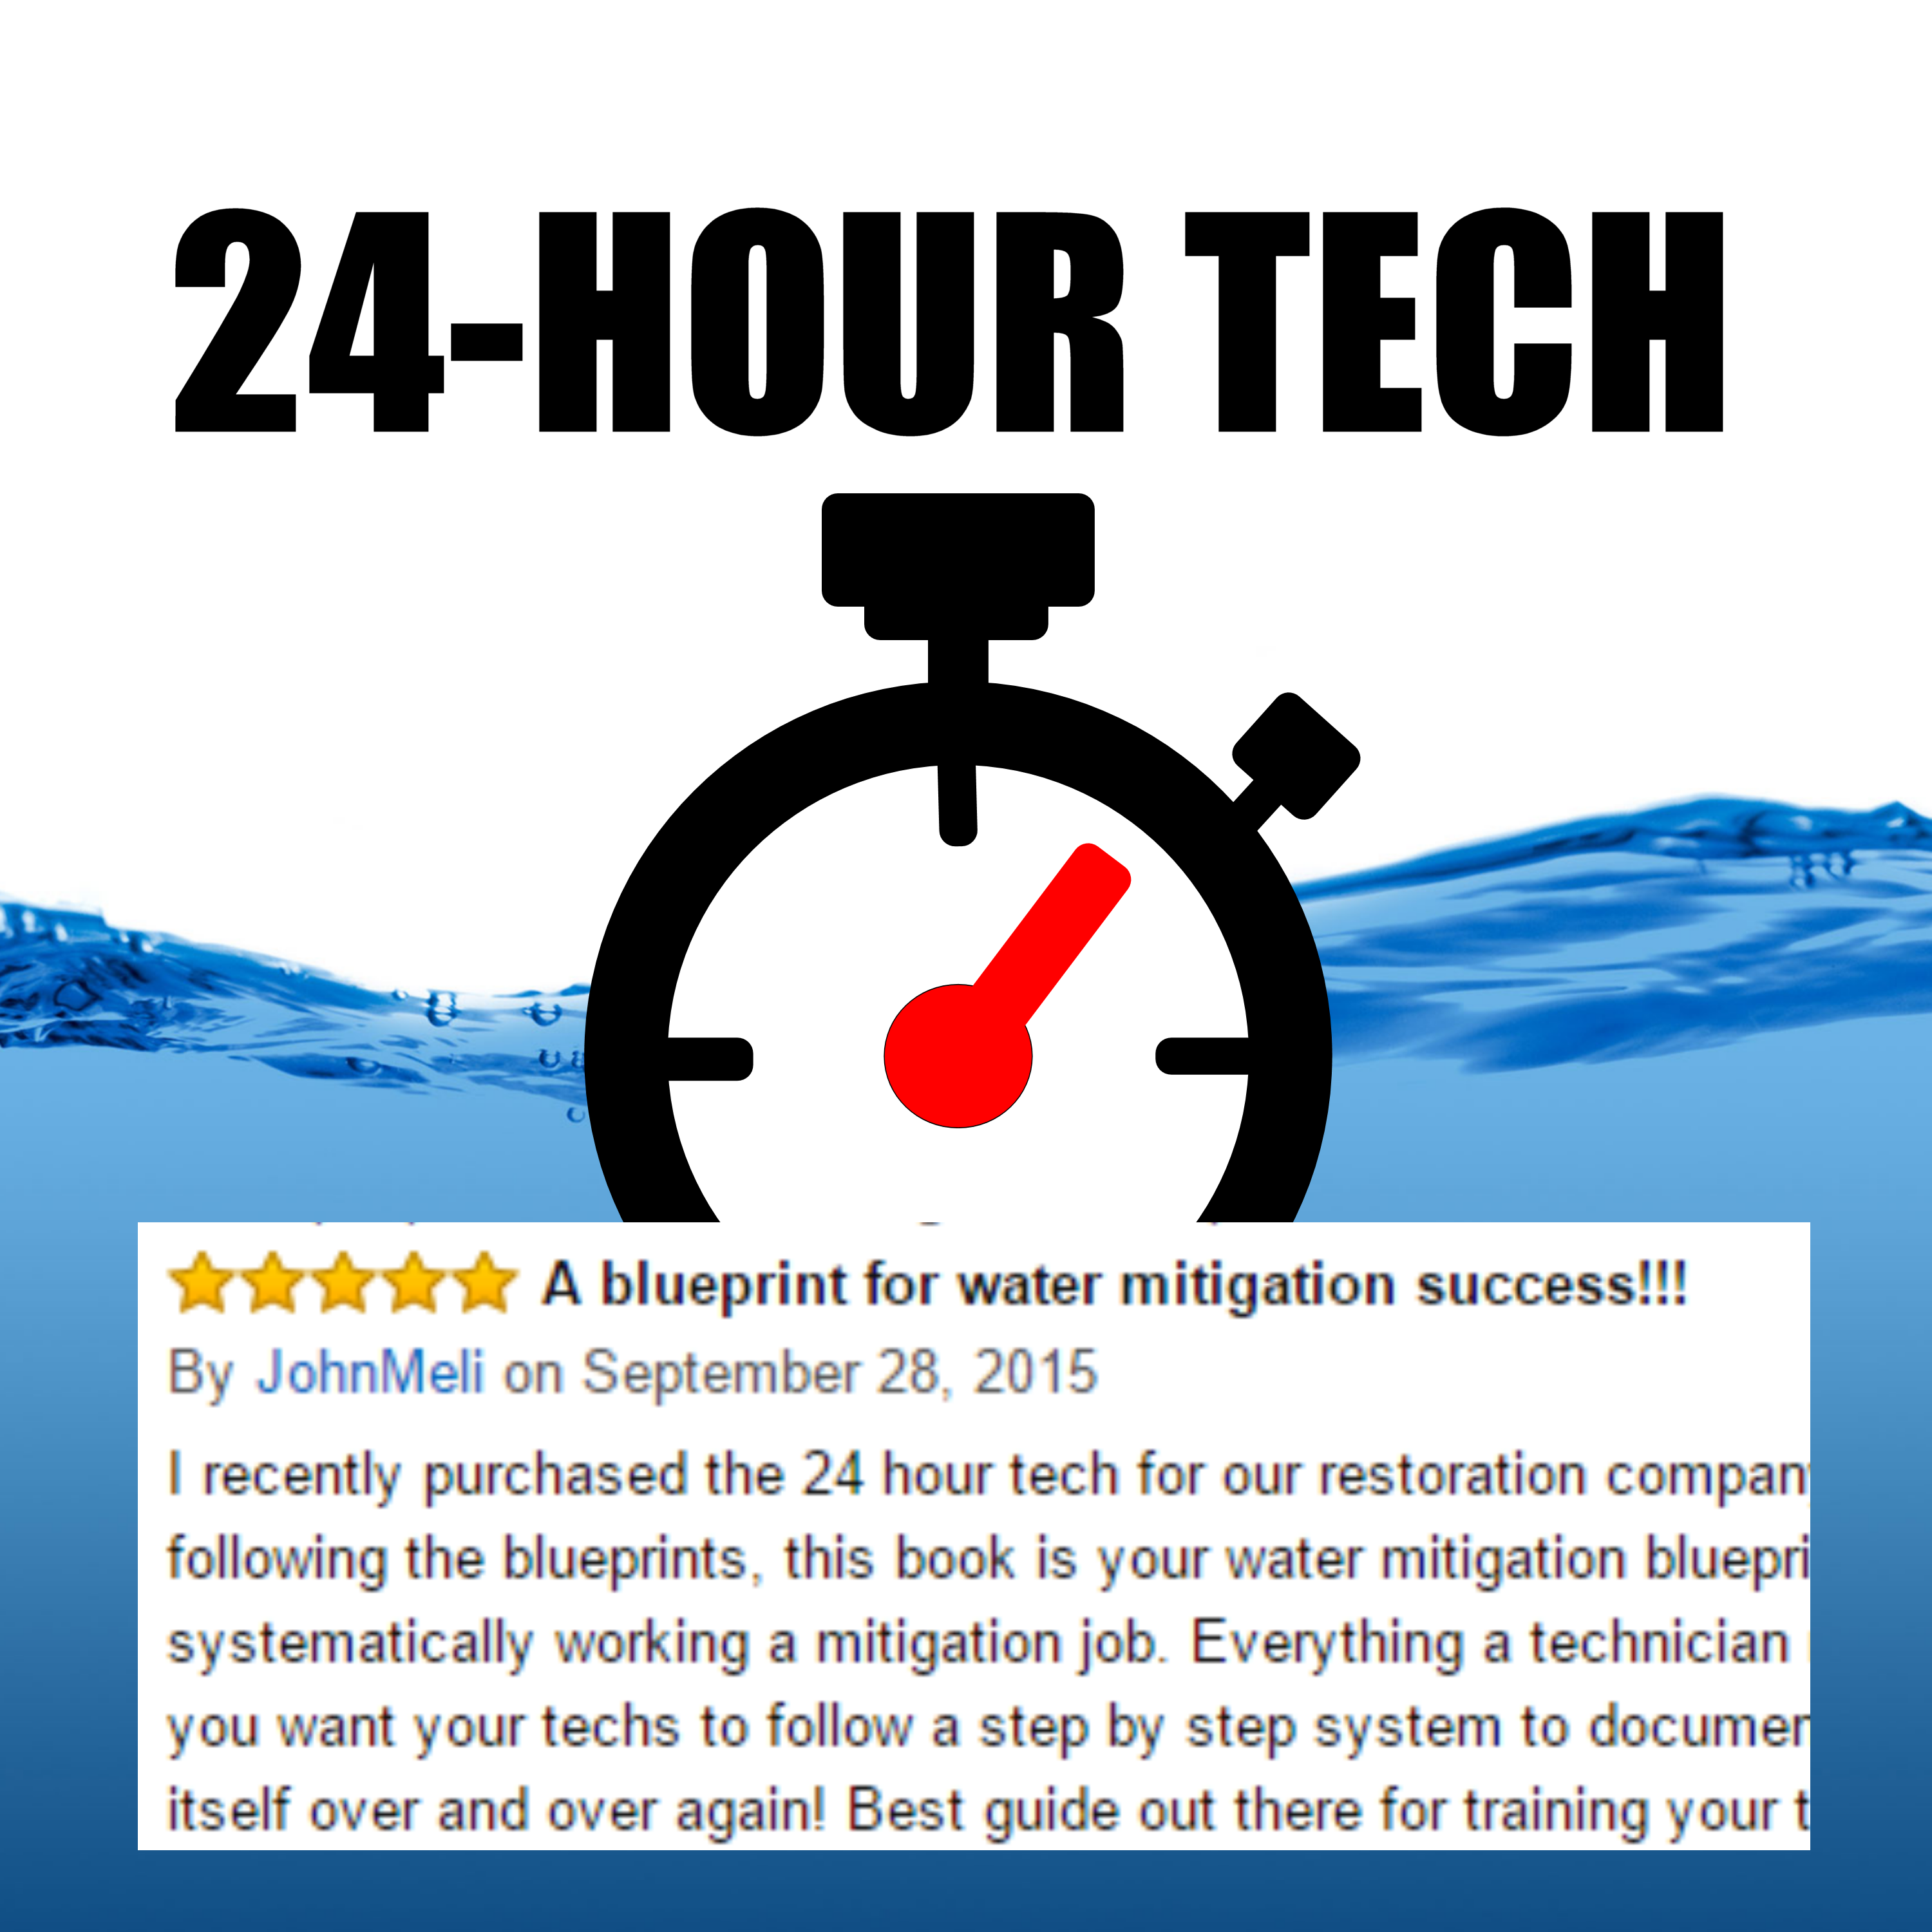 Introducing the 24-Hour Tech